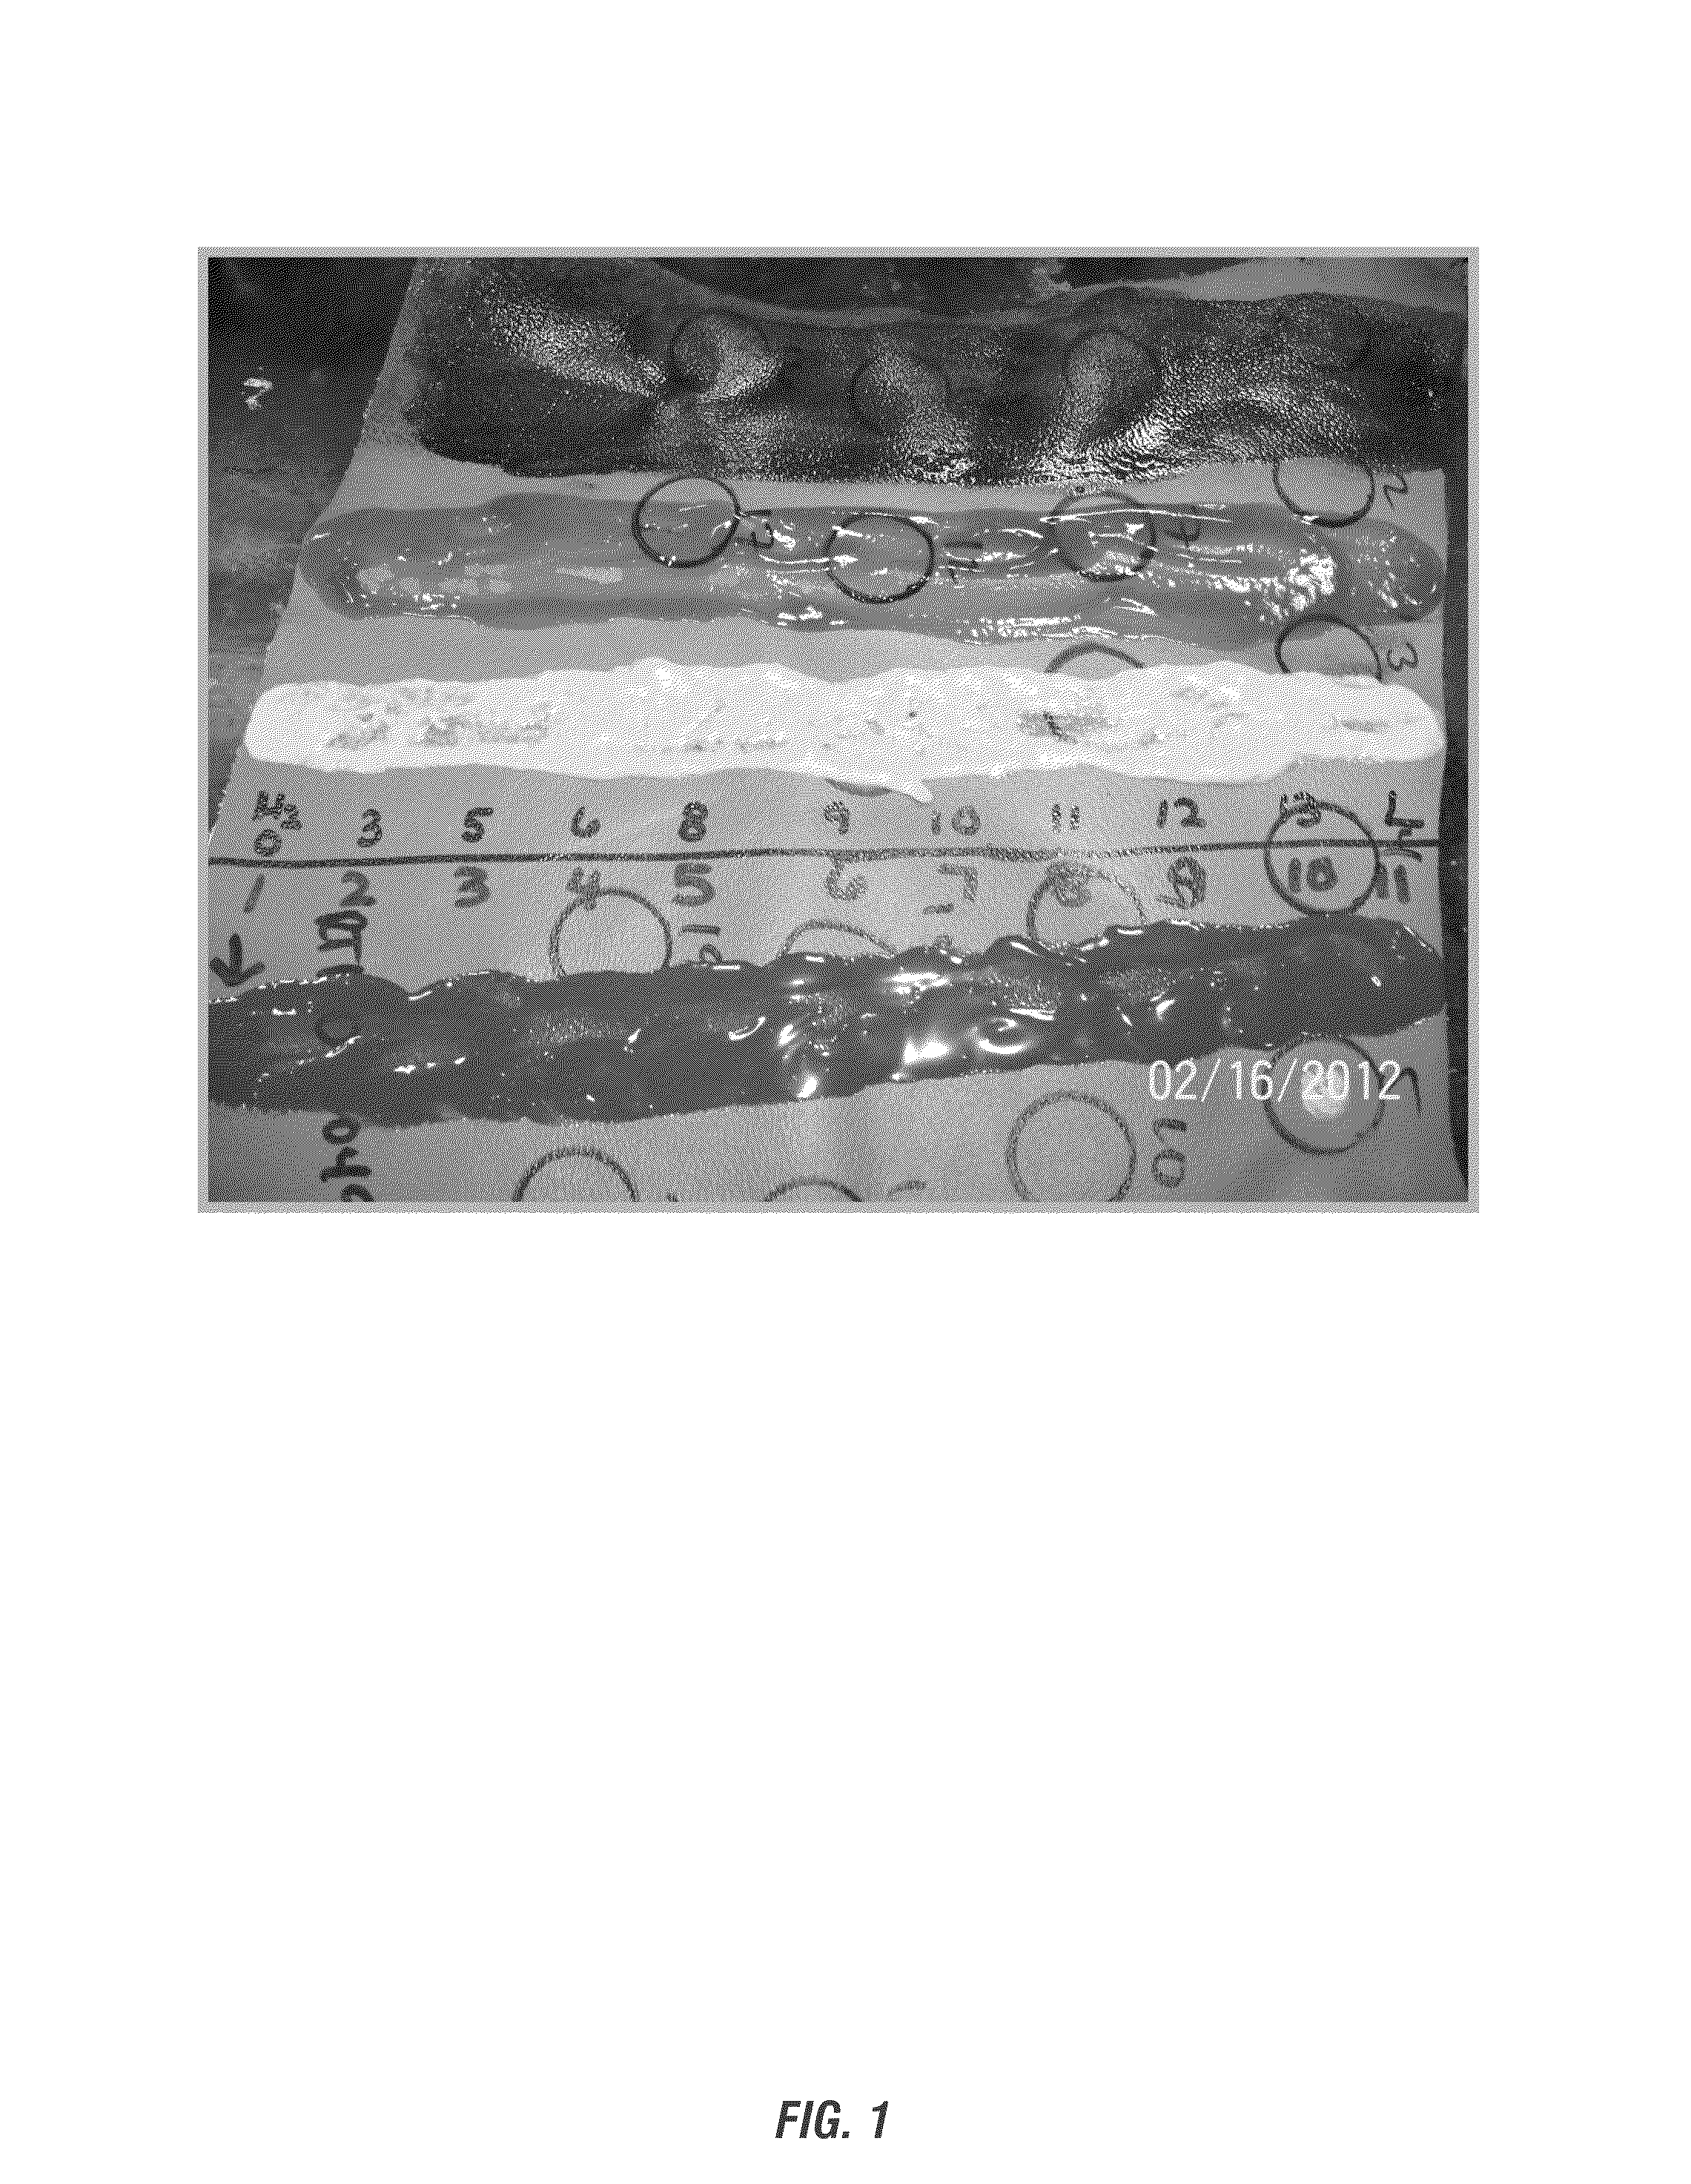 Leather and/or vinyl cleaner and moisturizer and method of making same